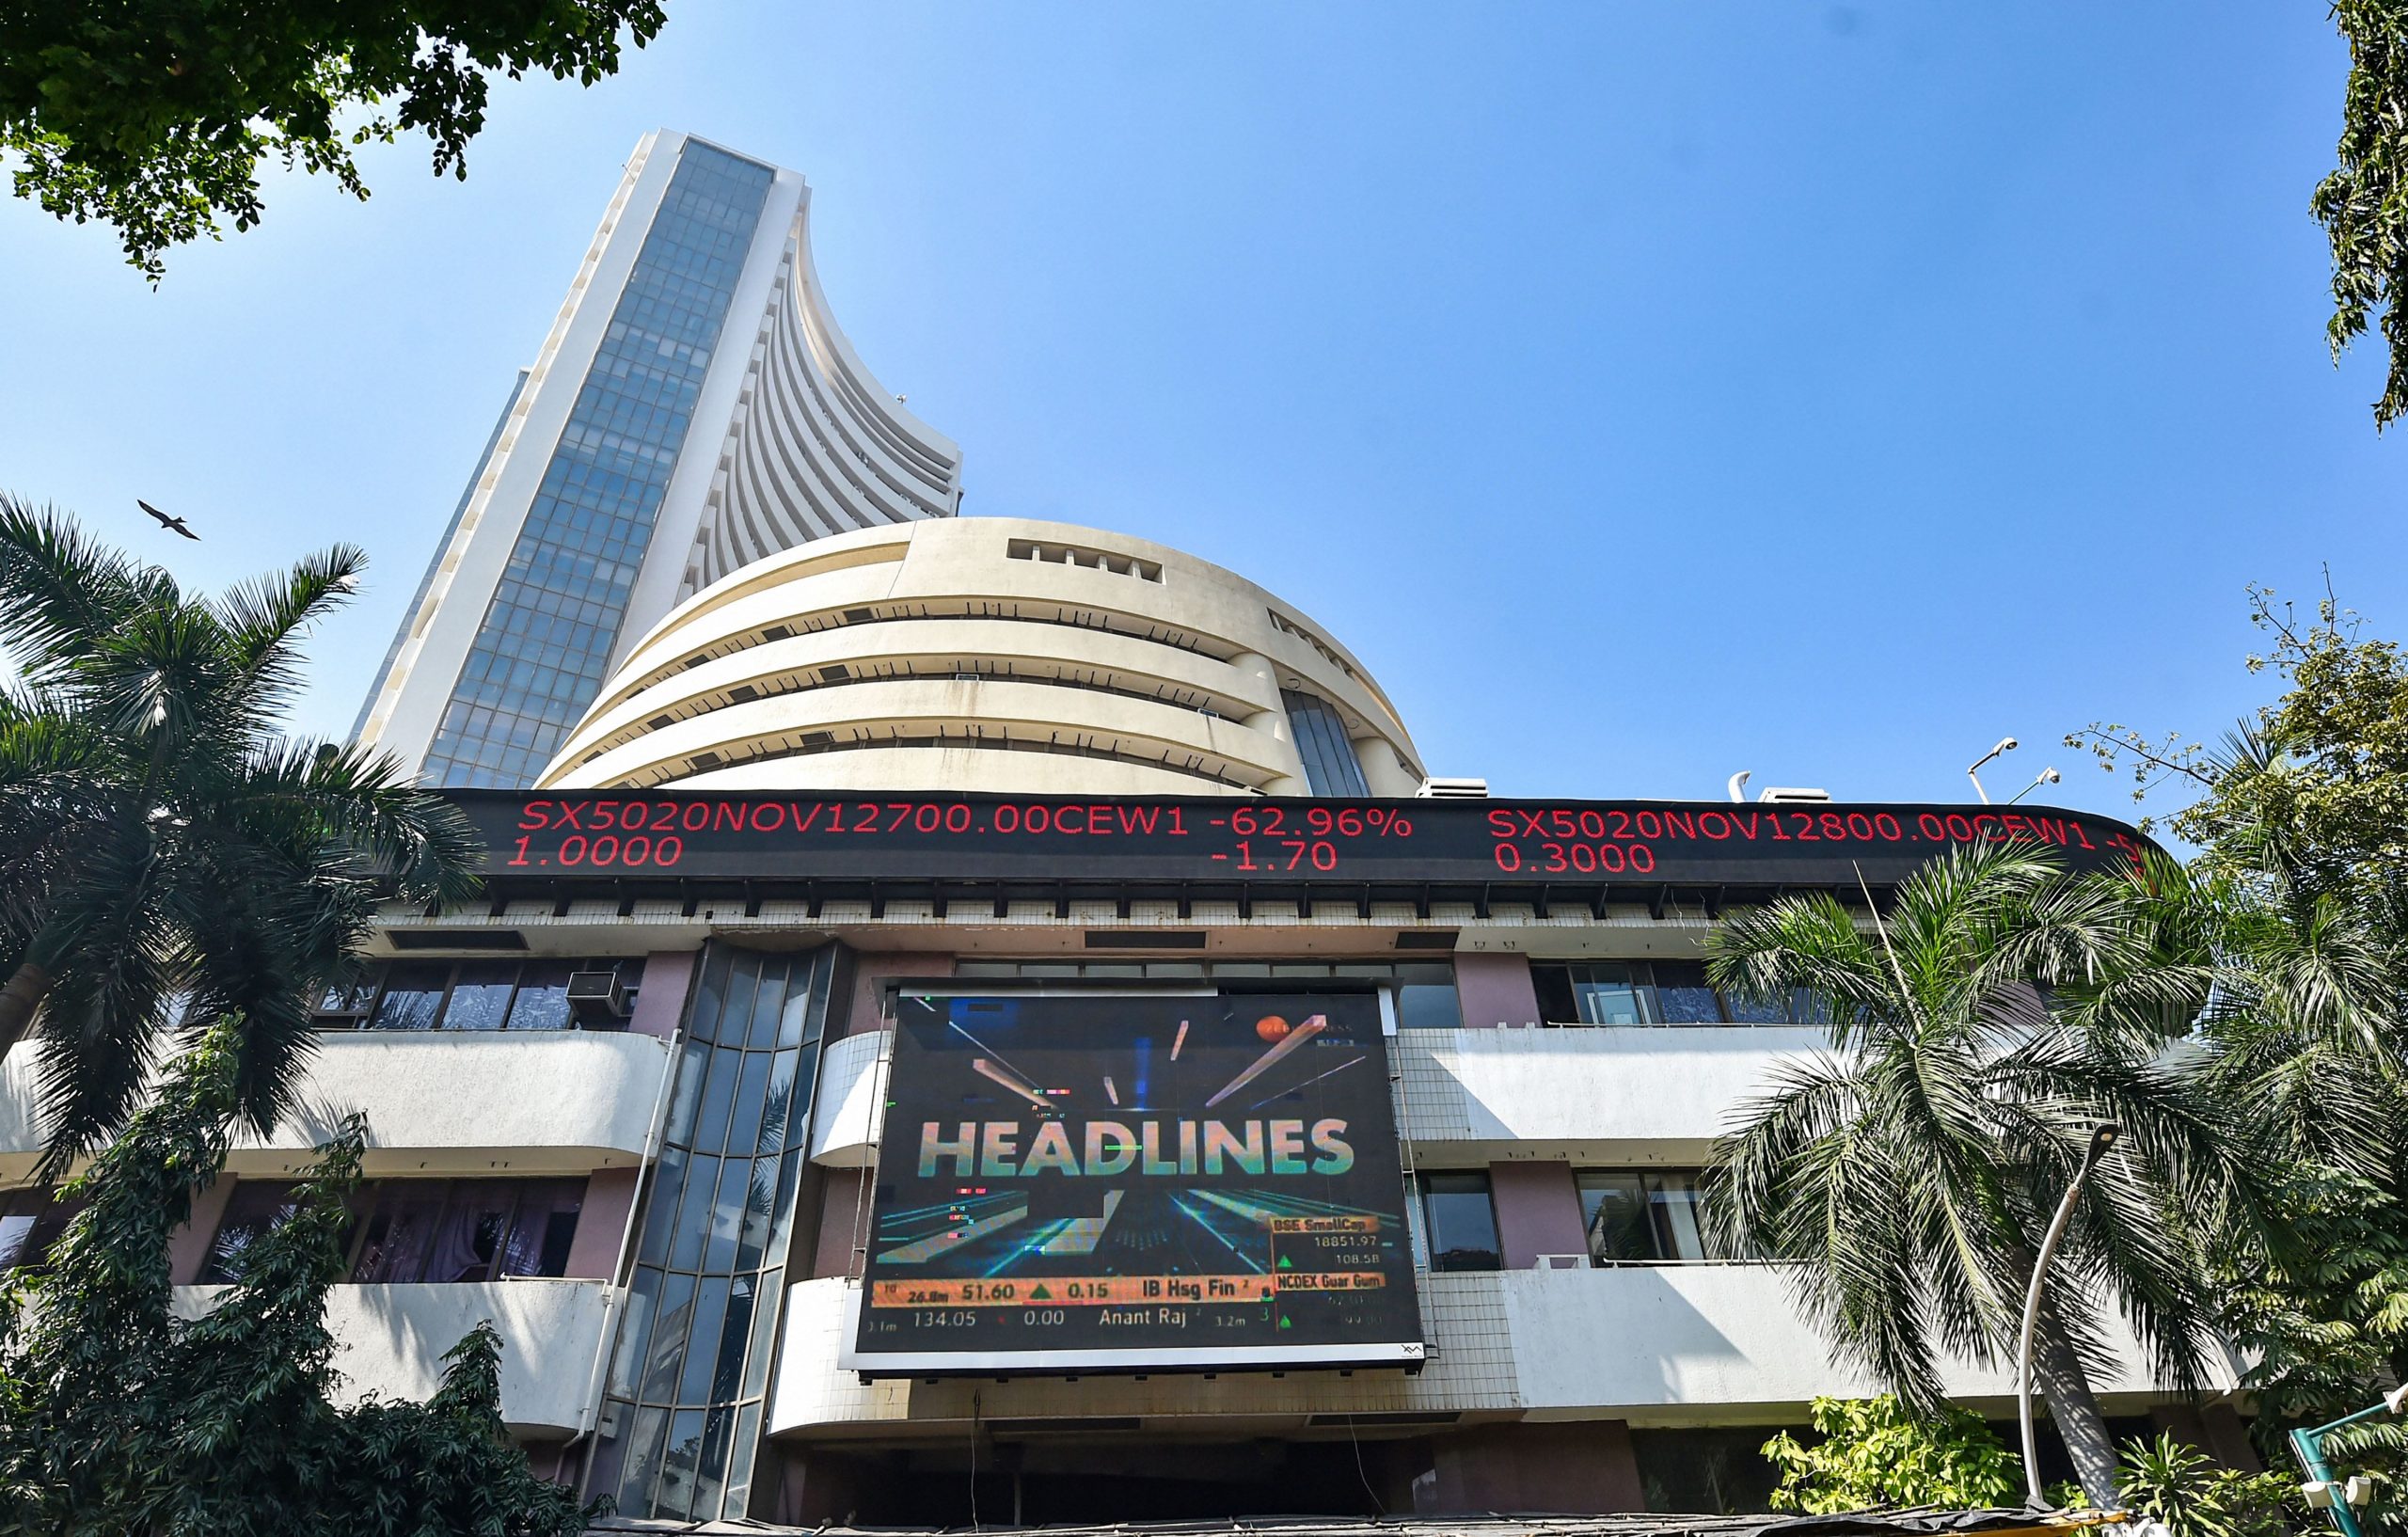 Trending Stocks: Axis Bank, Bajaj Finance, ITC and others in news today